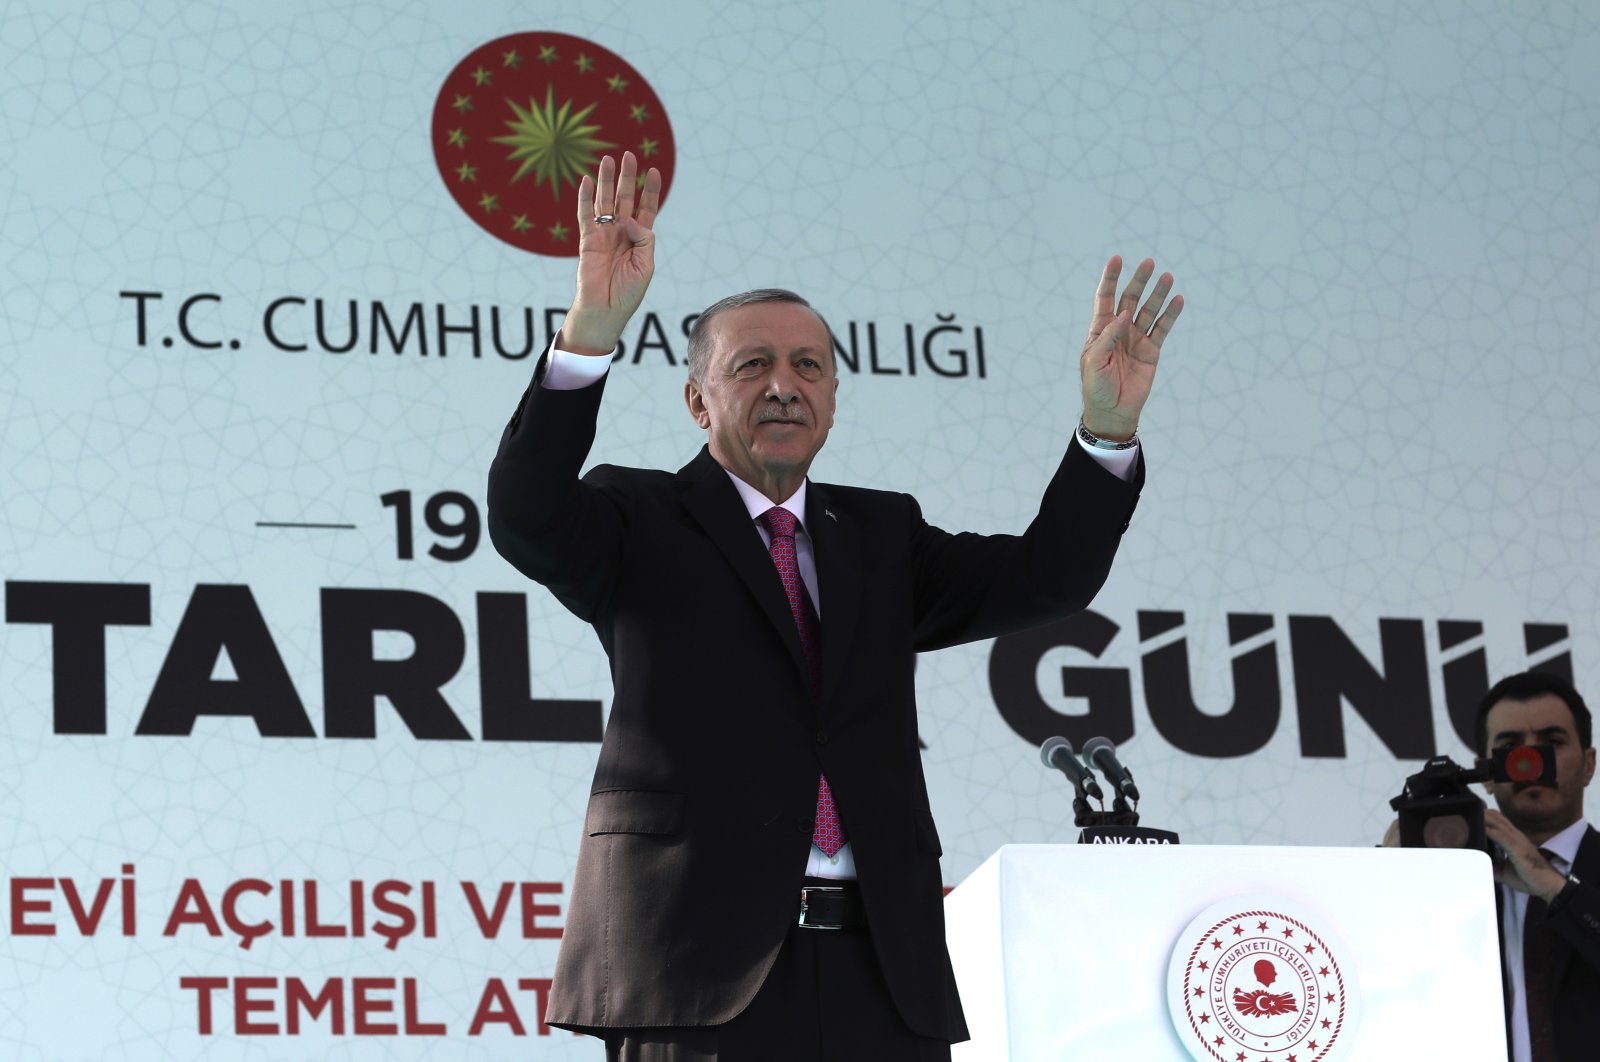 President Recep Tayyip Erdoğan salutes supporters at an inauguration ceremony of new government buildings in Ankara, Türkiye, Oct. 19, 2022. (AP Photo)